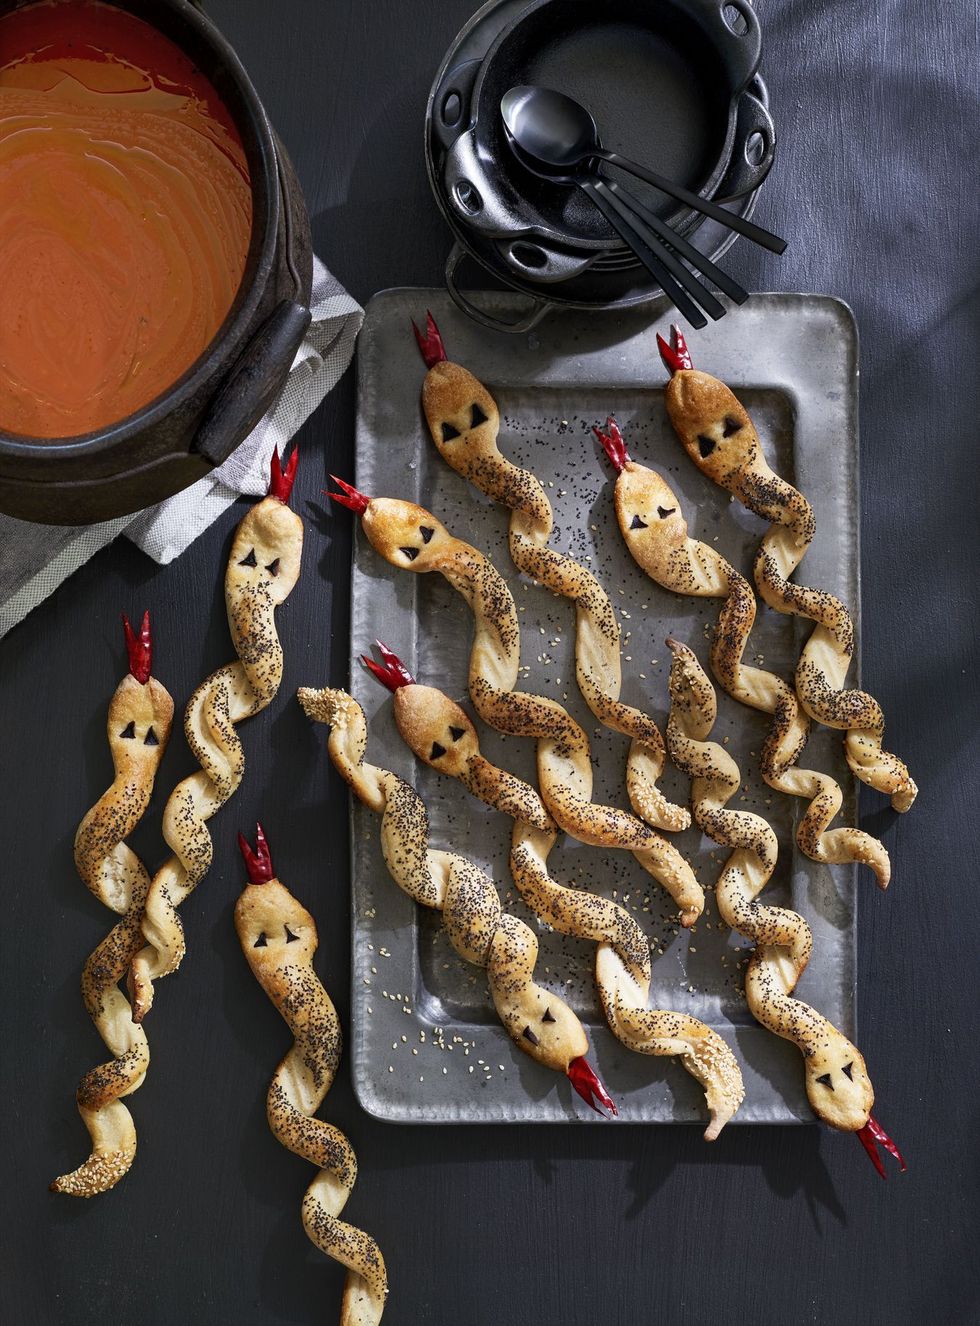 breadstick rattlers and dipping sauce, a spooky savory treat you might make as a halloween activity